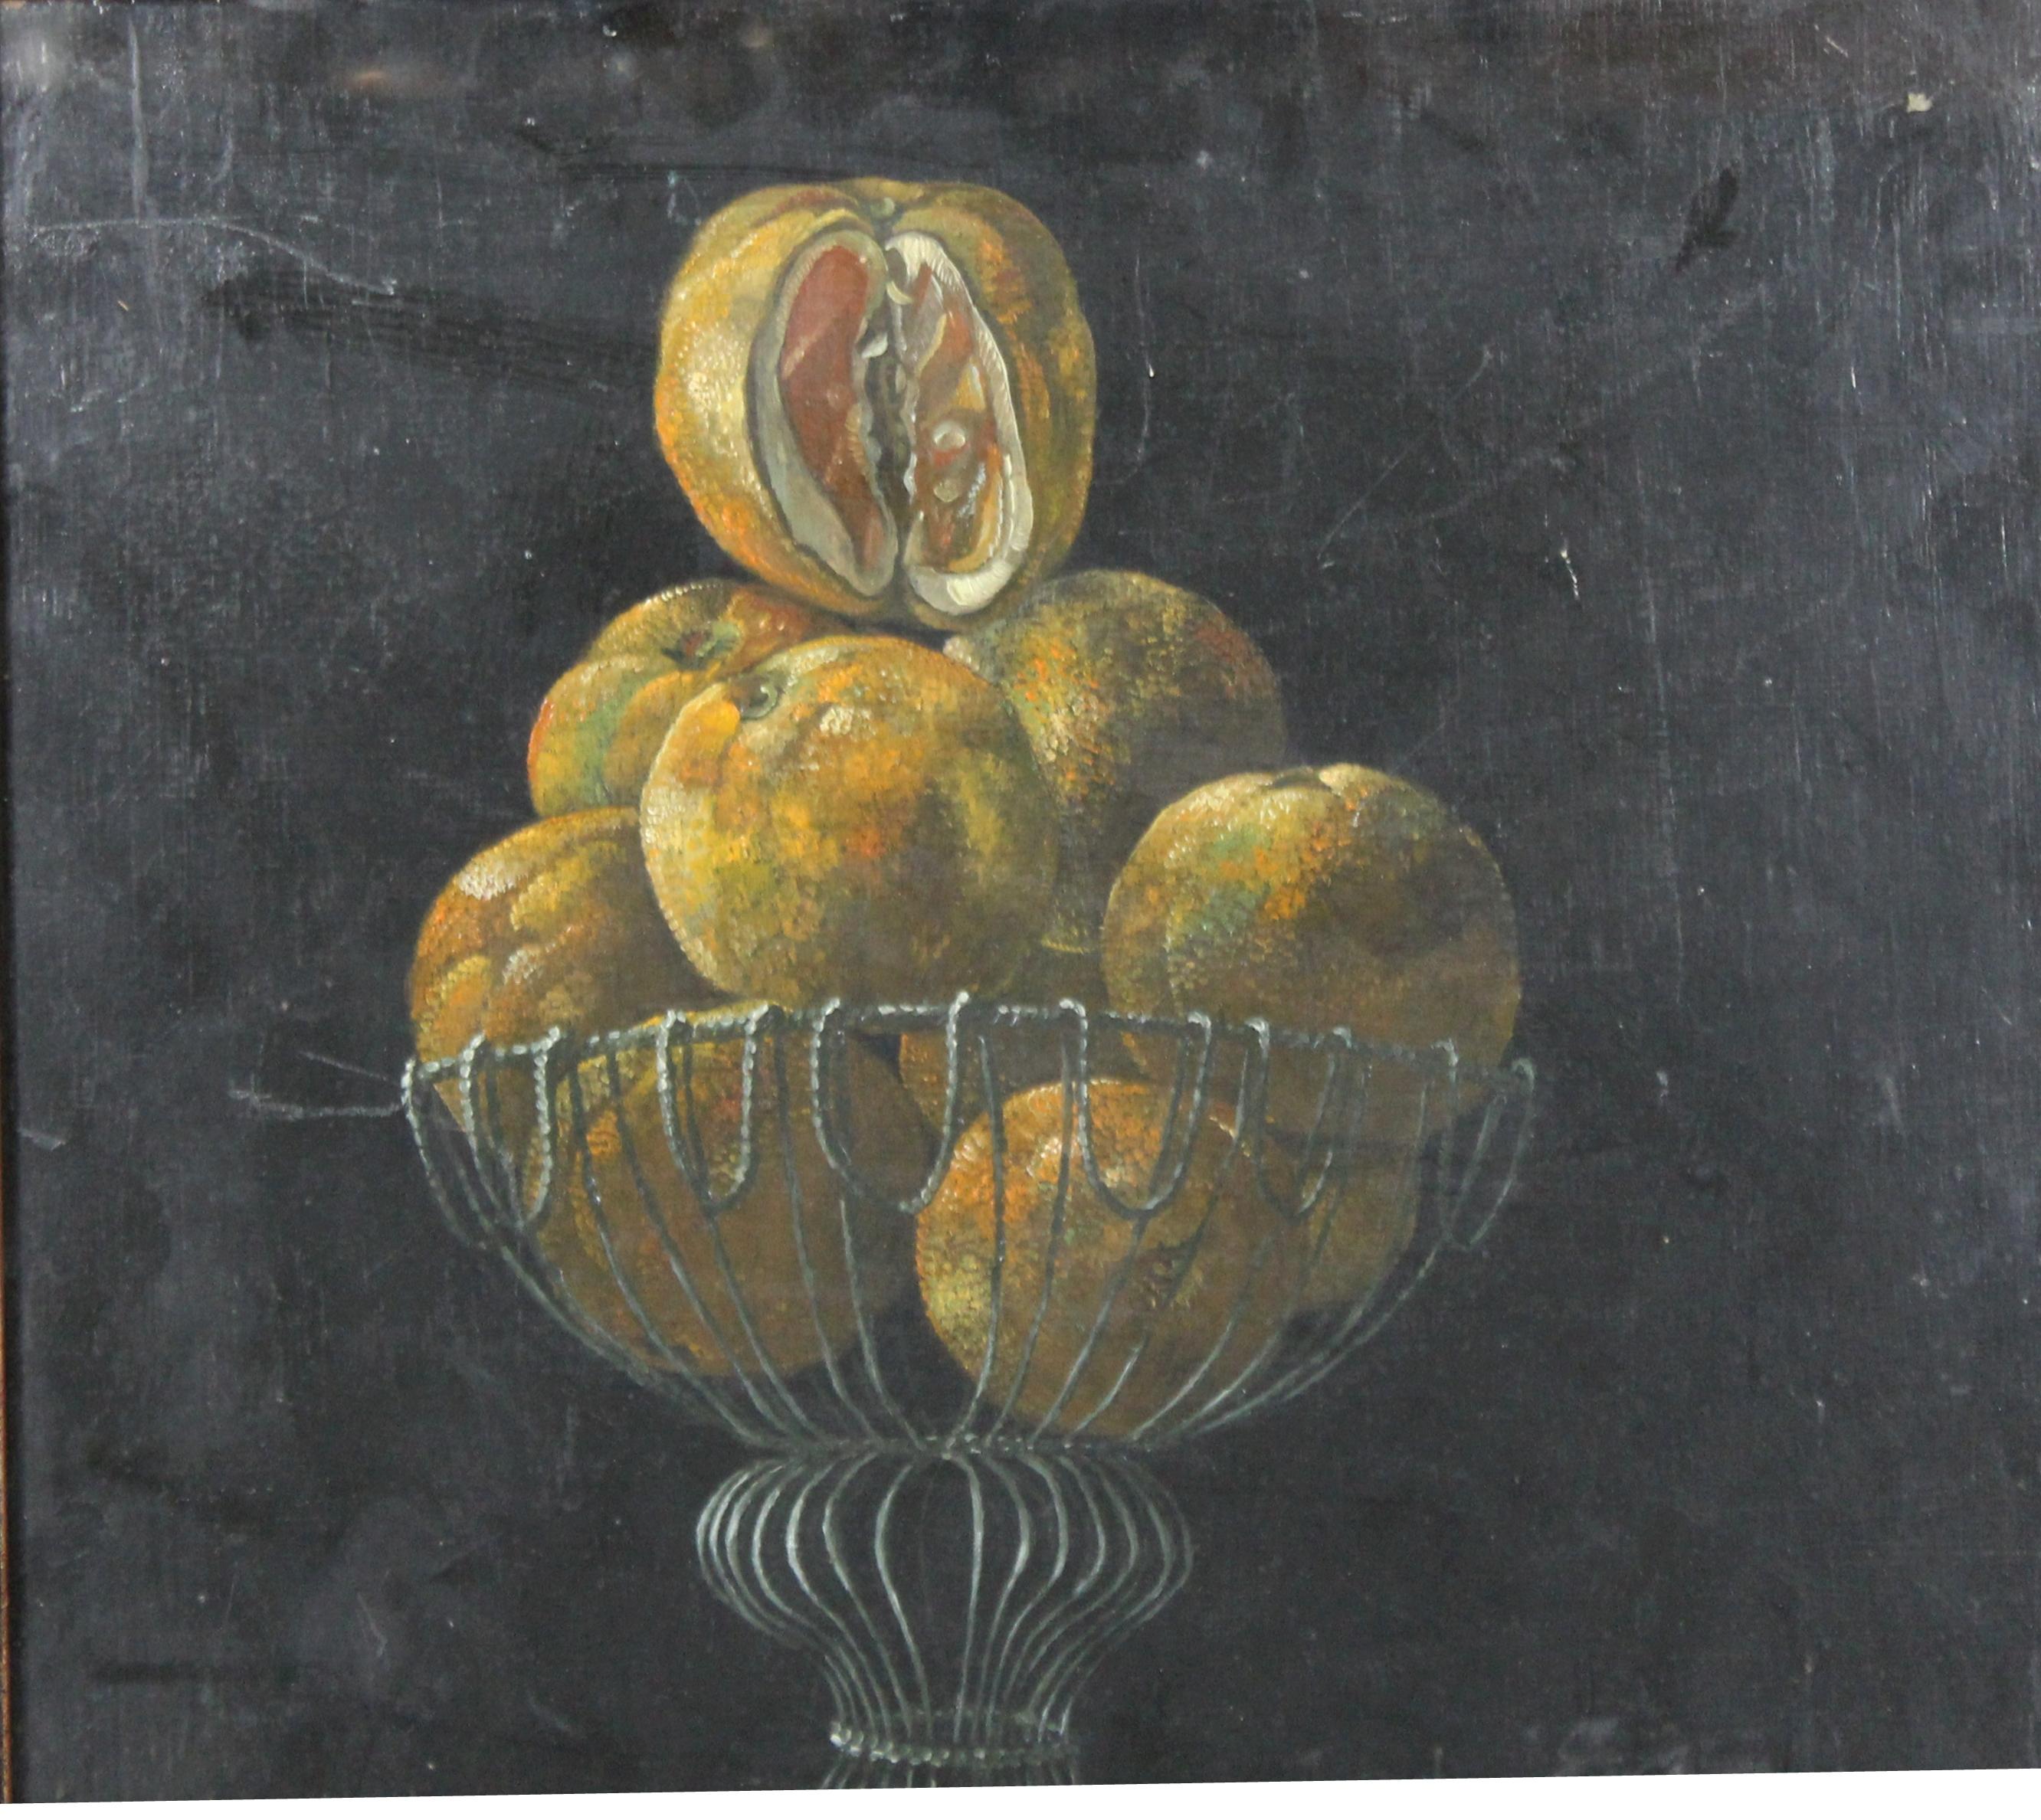 Dutch style still life oil on Masonite painting depicting oranges placed in a metal wire bowl atop a marble table. The piece is set in its original frame and was made during the 1950s. No signature or marks. In great vintage condition with